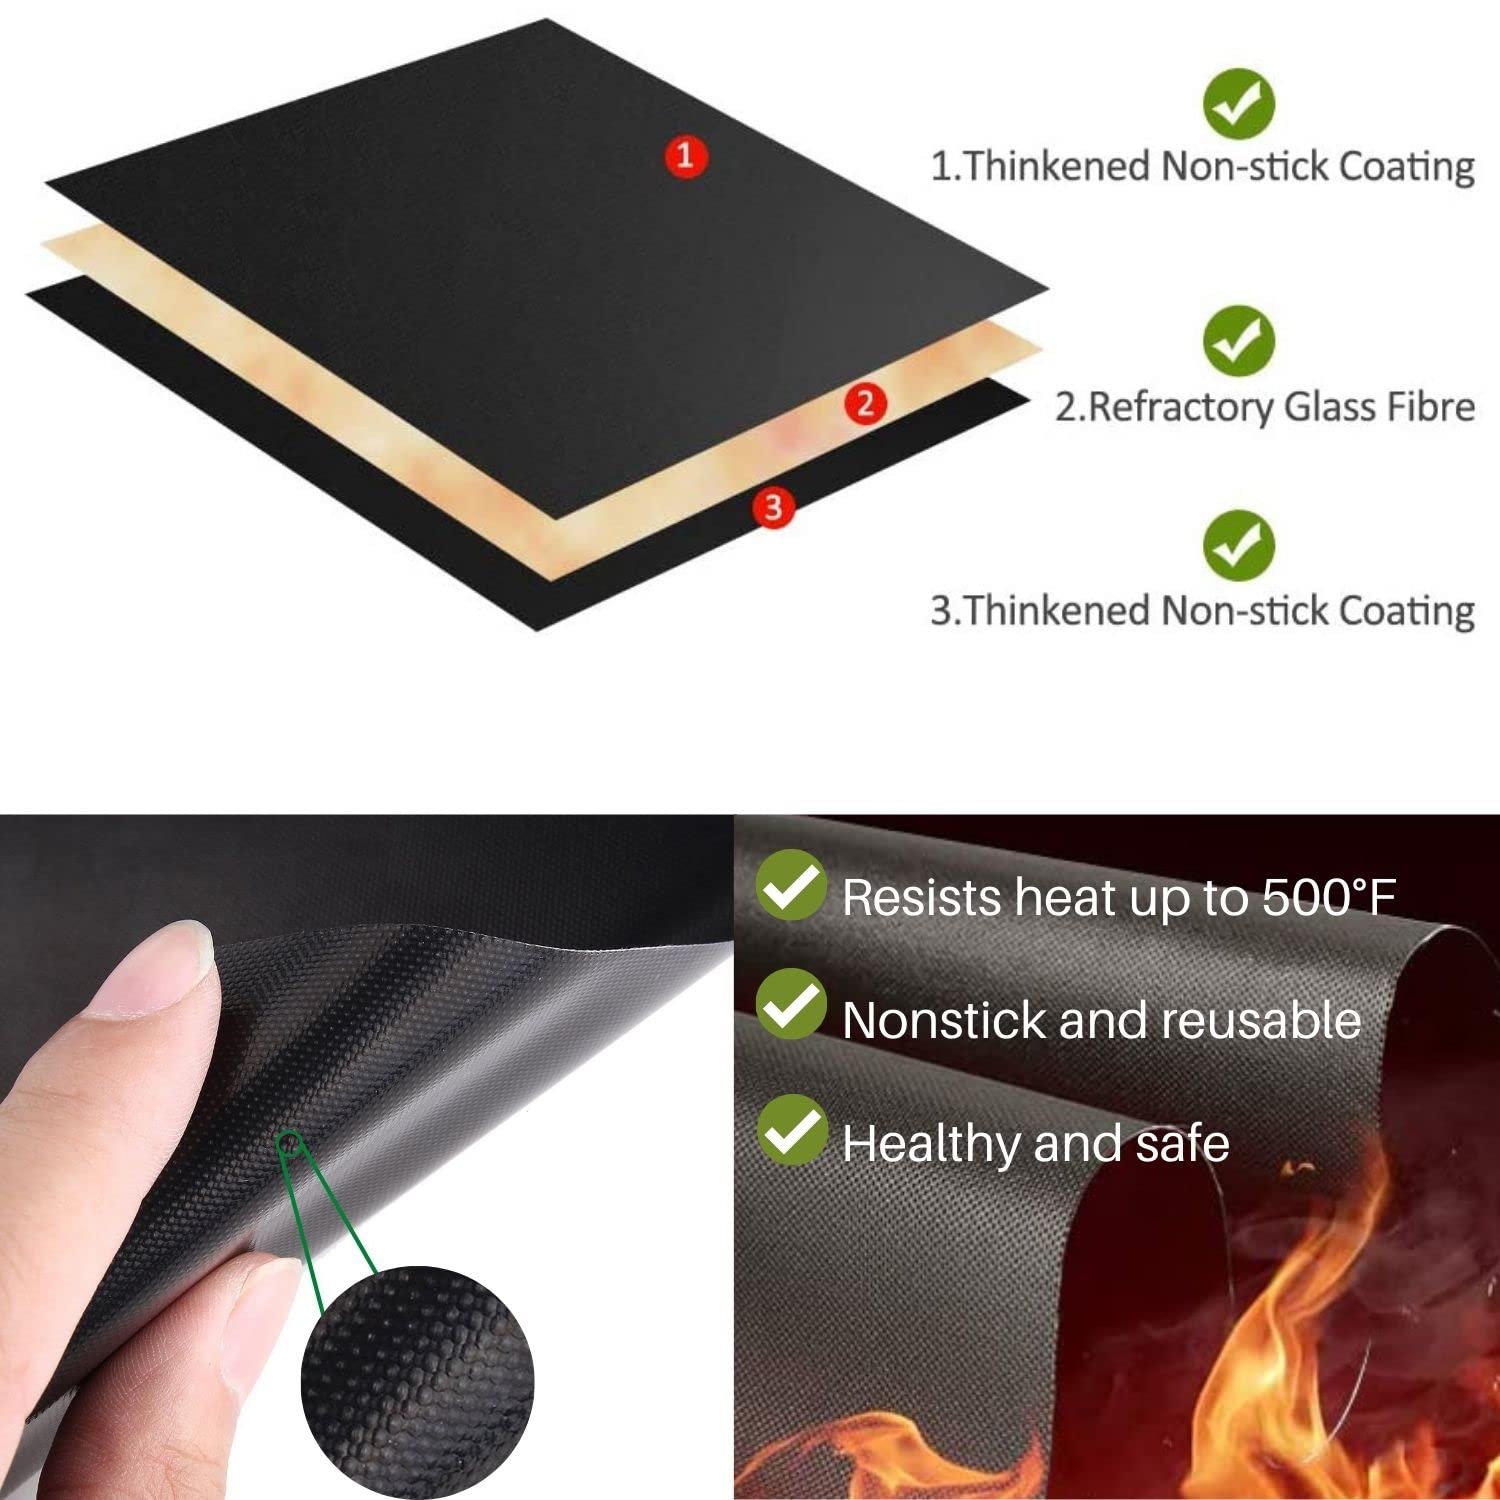 Oven Liners for Bottom of Electric Oven, 16 x 24 inch Reusable Nonstick Heat Resistant Liner Mat for Gas Oven, Microwave, Charcoal, Outdoor BBQ Grill Mats 3(Pack/Piece)